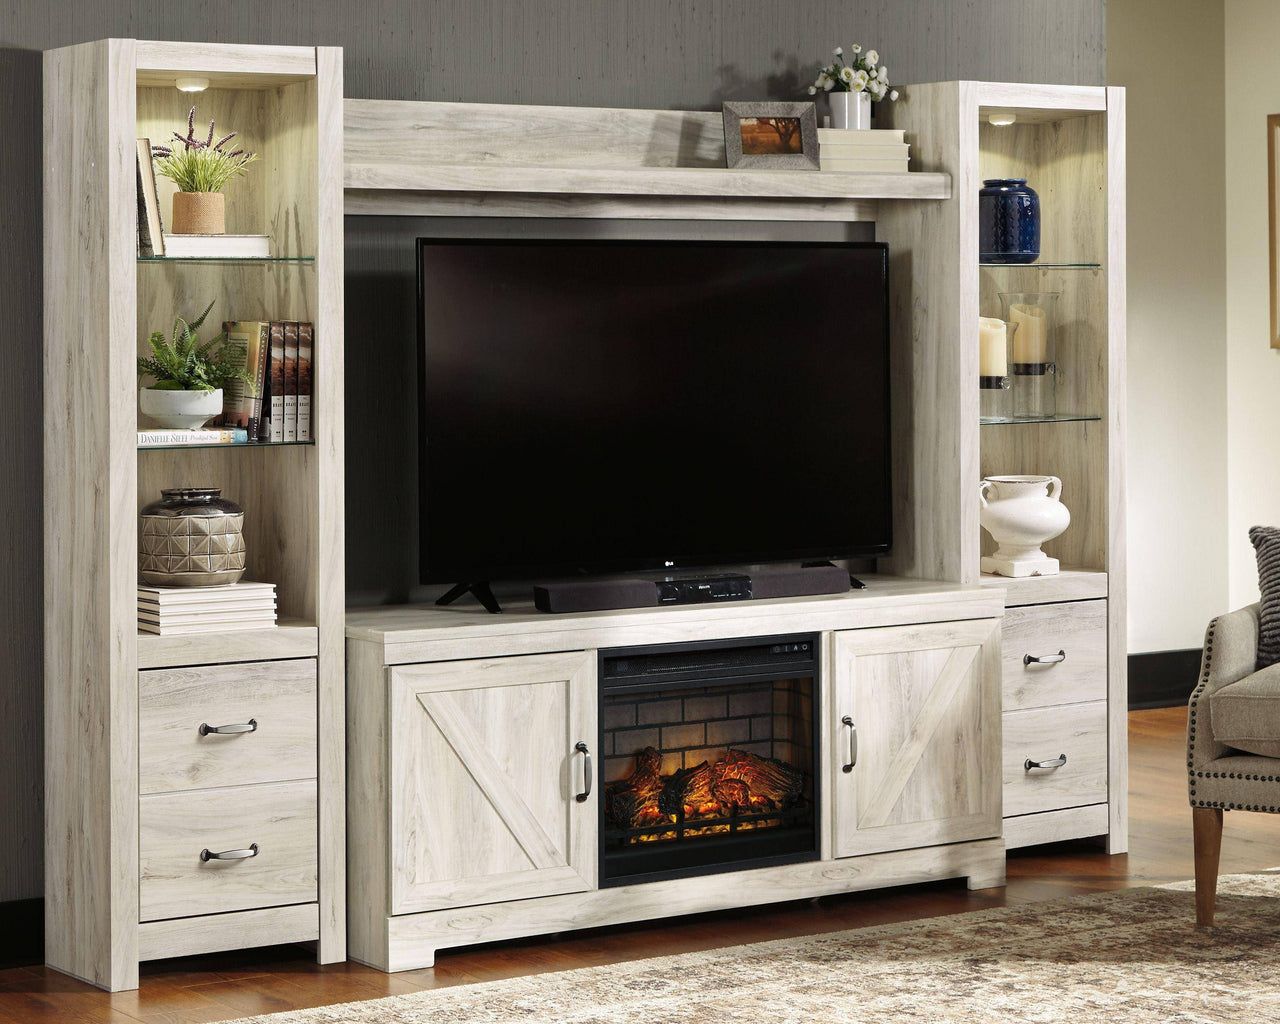 Bellaby - Whitewash - Entertainment Center - TV Stand With Faux Firebrick Fireplace Insert Tony's Home Furnishings Furniture. Beds. Dressers. Sofas.